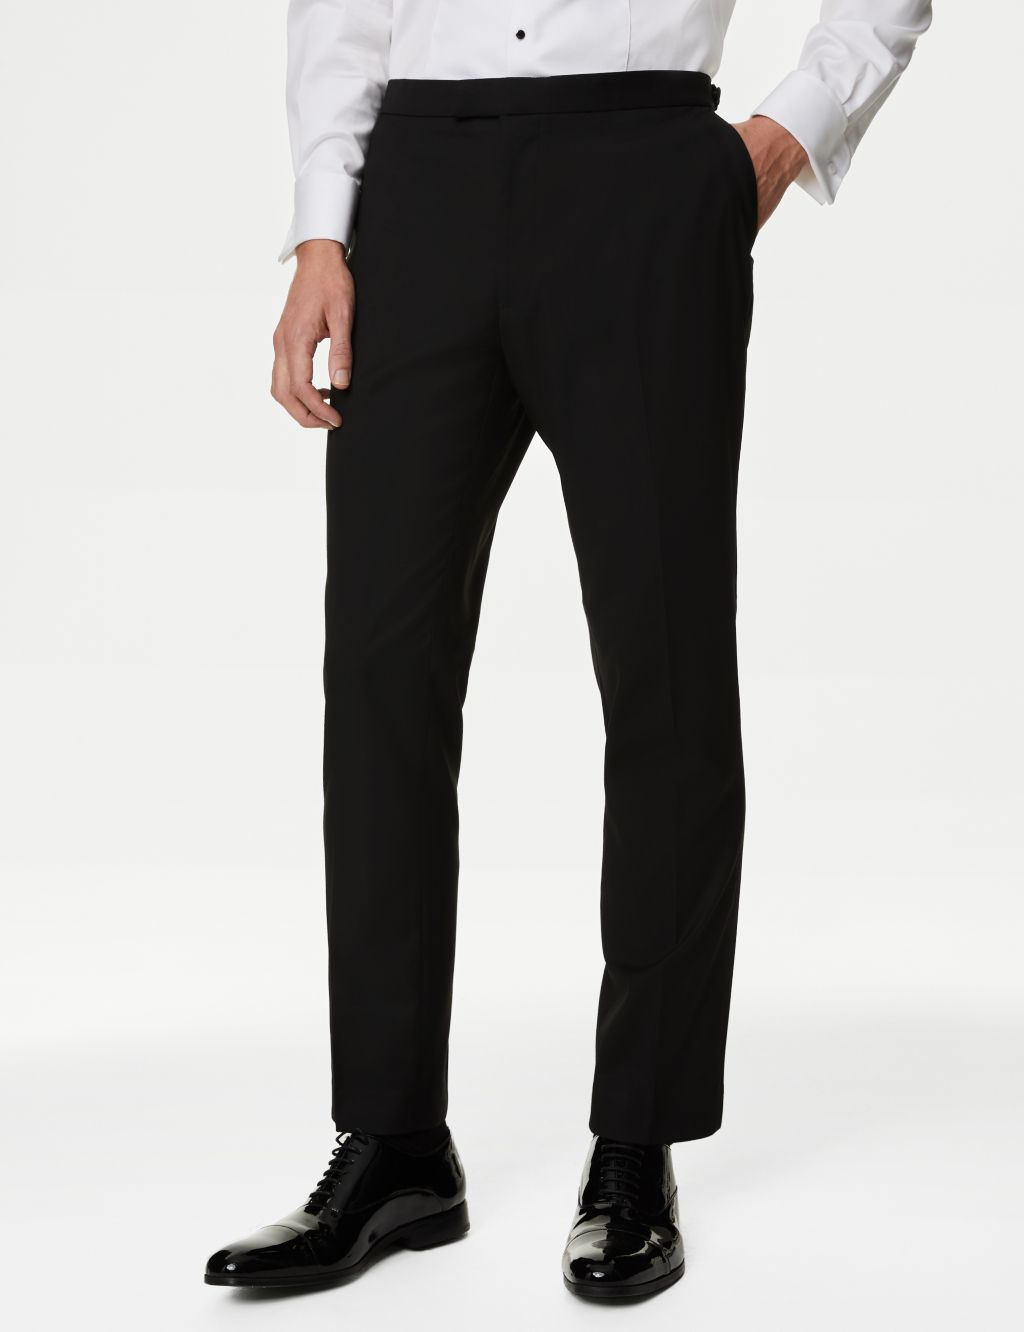 Skinny Fit Stretch Tuxedo Suit image 4